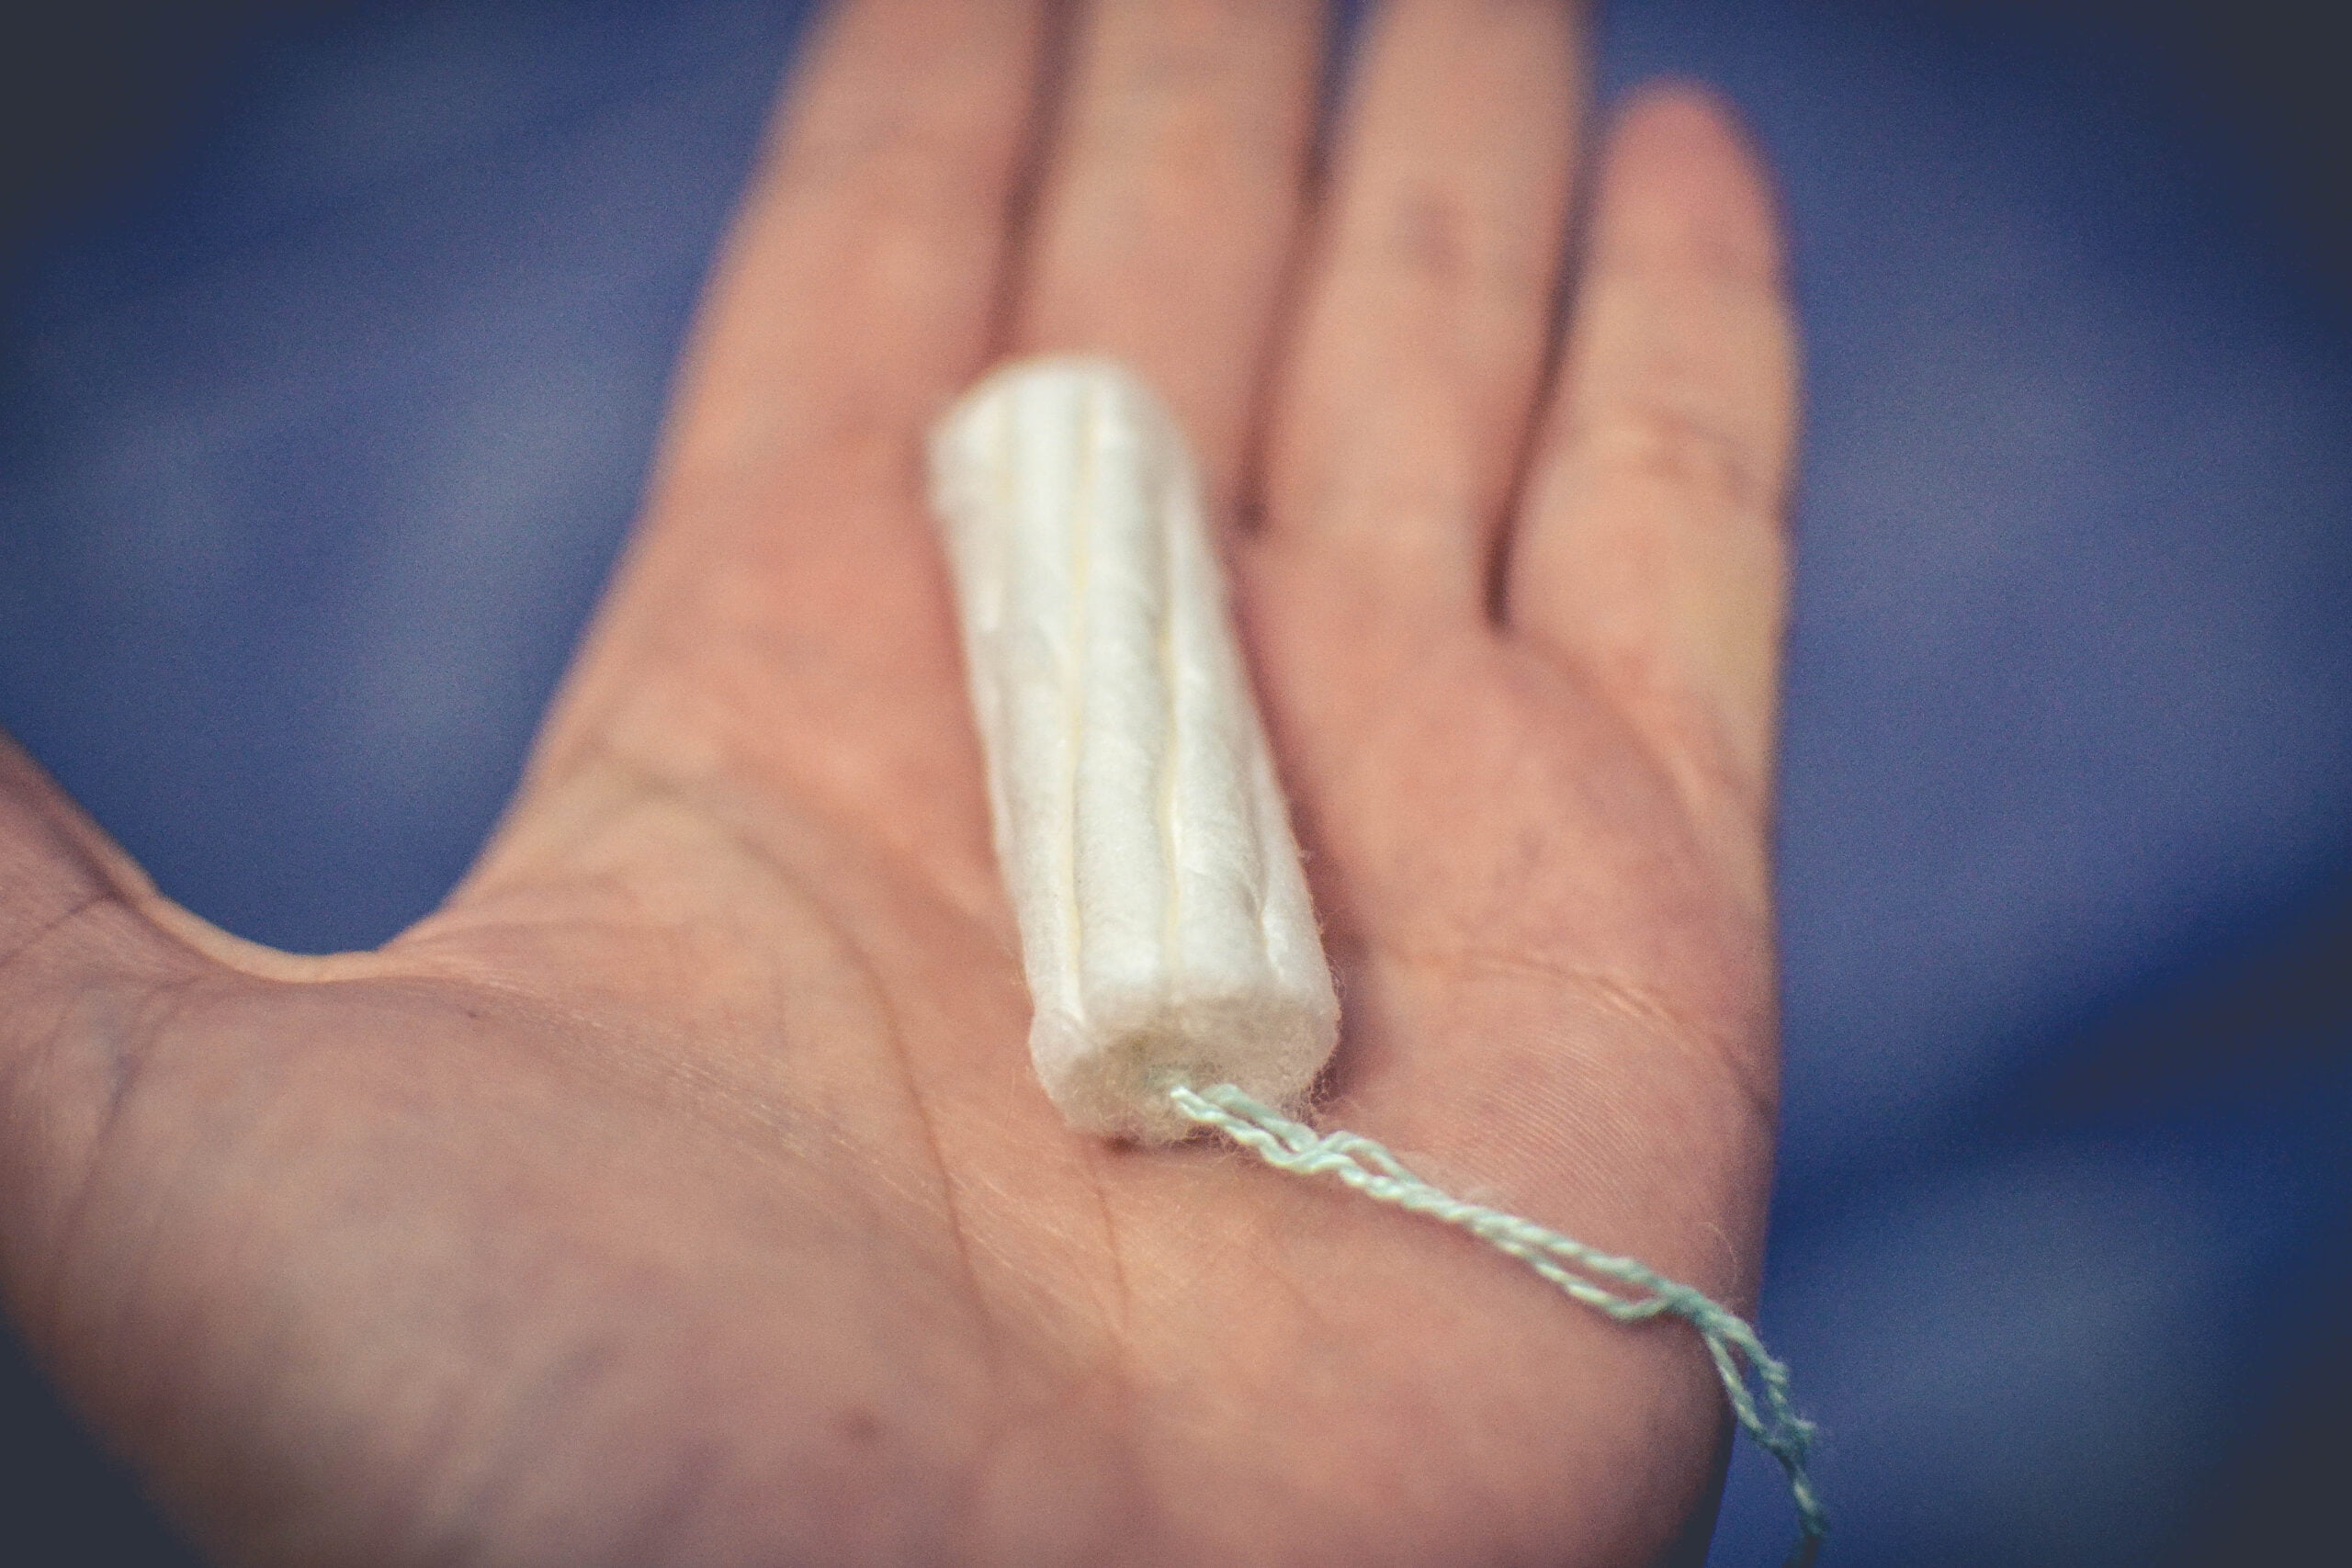 Does the Use of Tampon cause Endometriosis or Infertility?